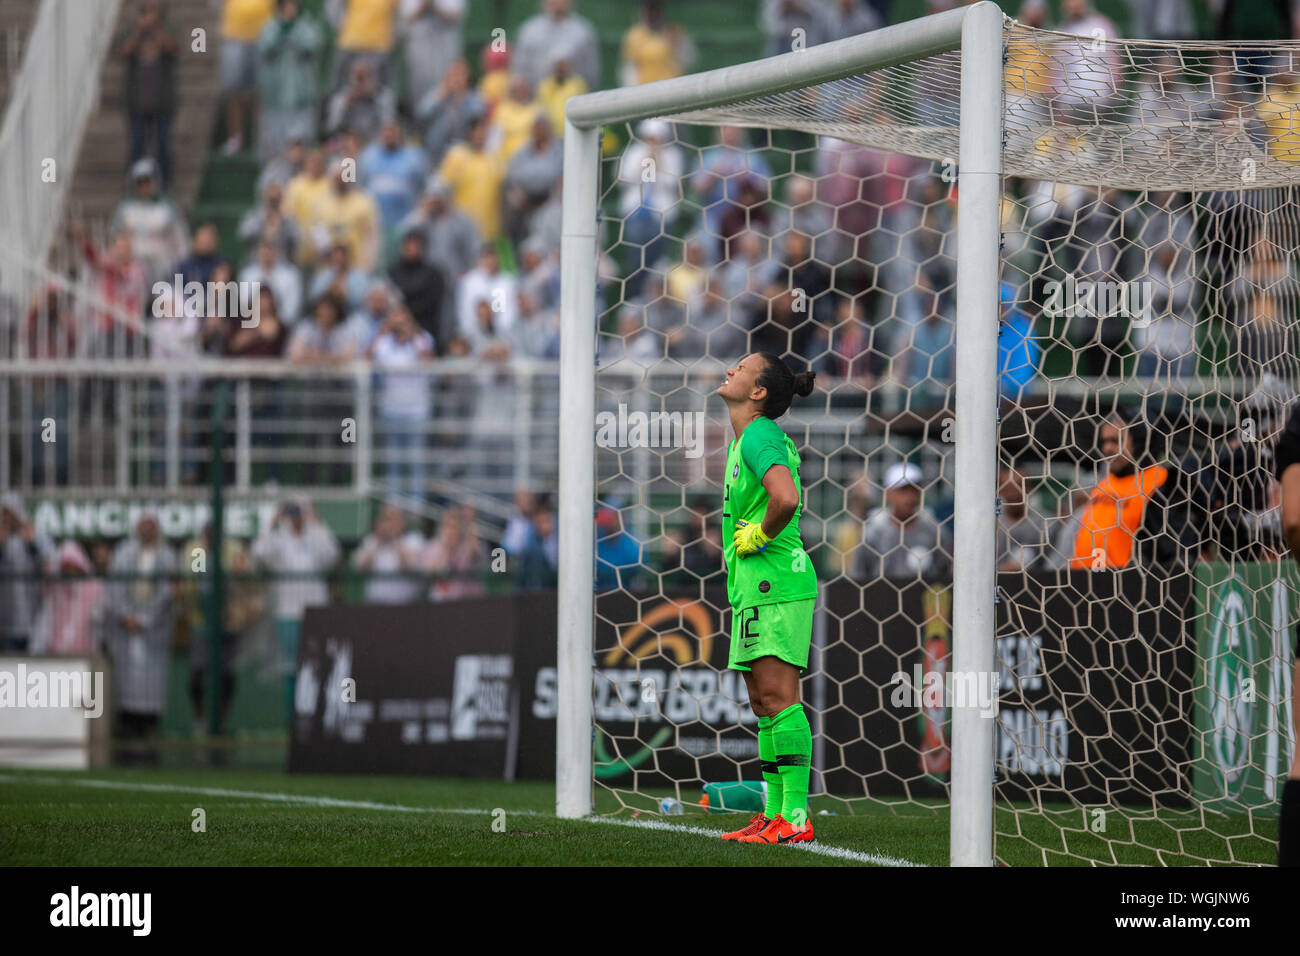 SÃO PAULO, SP - 01.09.2019: BRAZIL X CHILE - Goalkeeper Aline Reis during the penalty shootout that gave Chile the victory. Chilean team celebrates victory on penalties. Uber Women's Sr Cup Cup - Chilean national team wins the Brazilian women&# socteam onm on penalties after a 0-0 draw iaw in normal time. With t of rain, which disrupted the football of bof both teams, and with audience of 15,047 paying and income of $ 174,073.00. The match took place this Sunday, September 1st, 2019, at Pacaembu Stadium, in São Paulo. (Photo: Van Campos/Fotoarena) Stock Photo